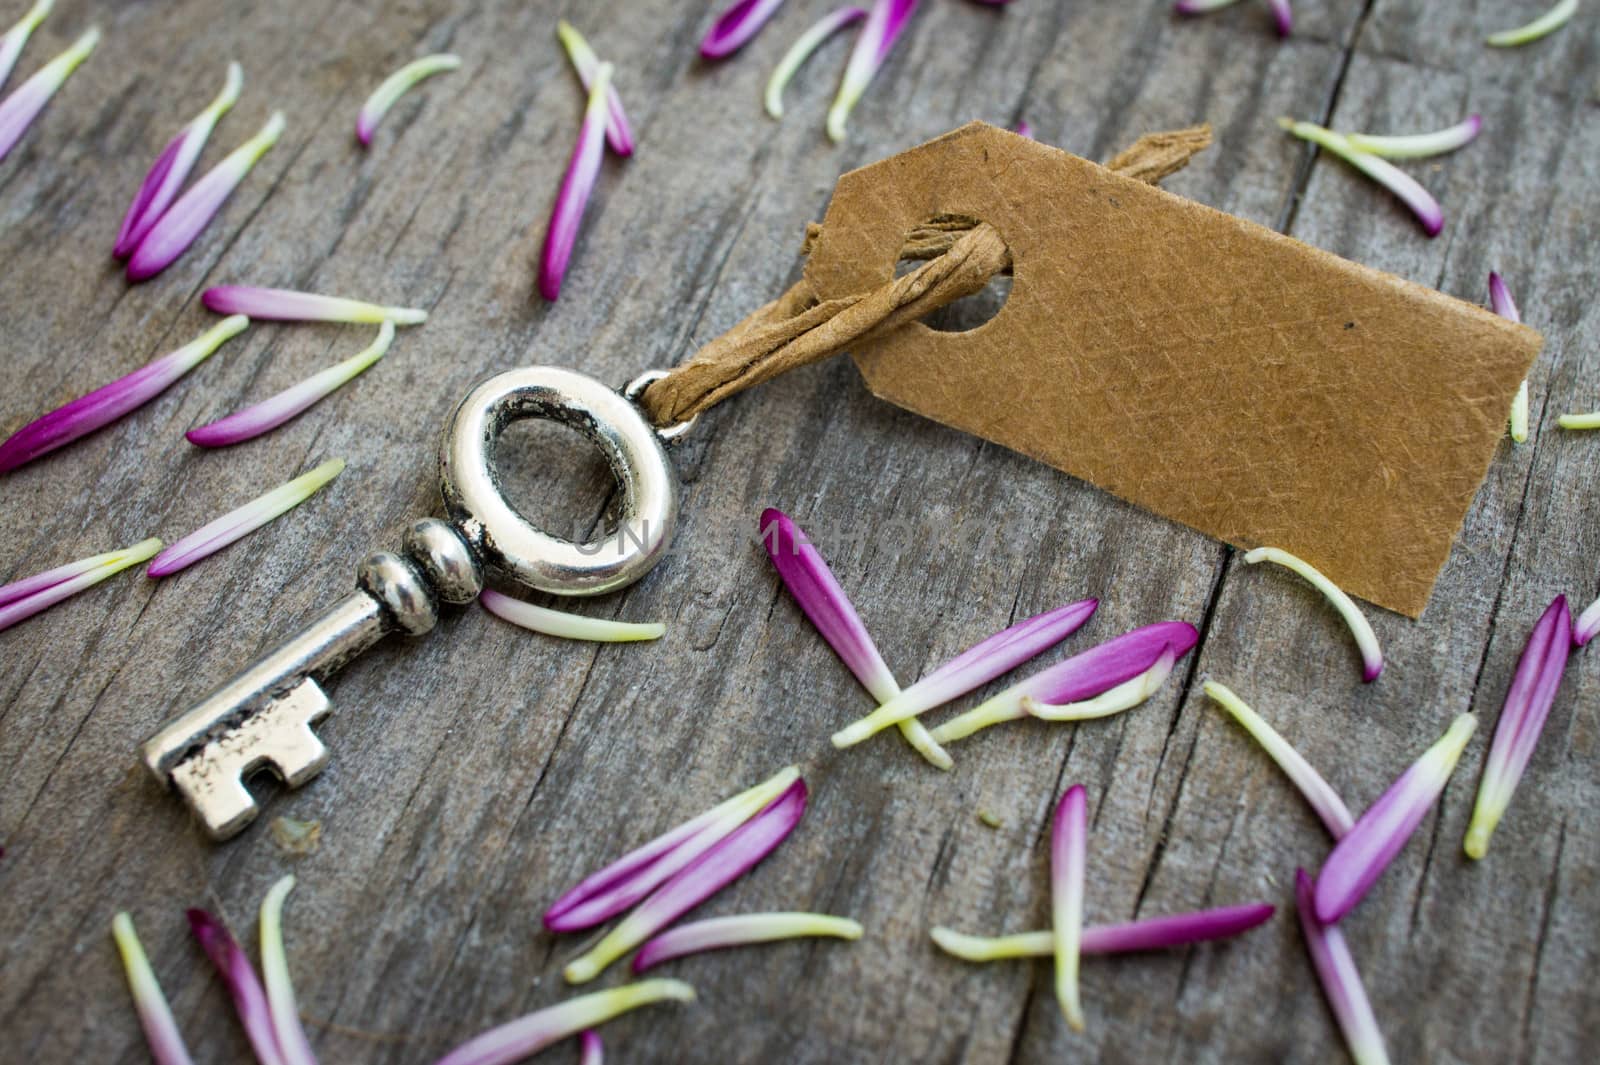 A Key with a label on wood background and purple flower petals